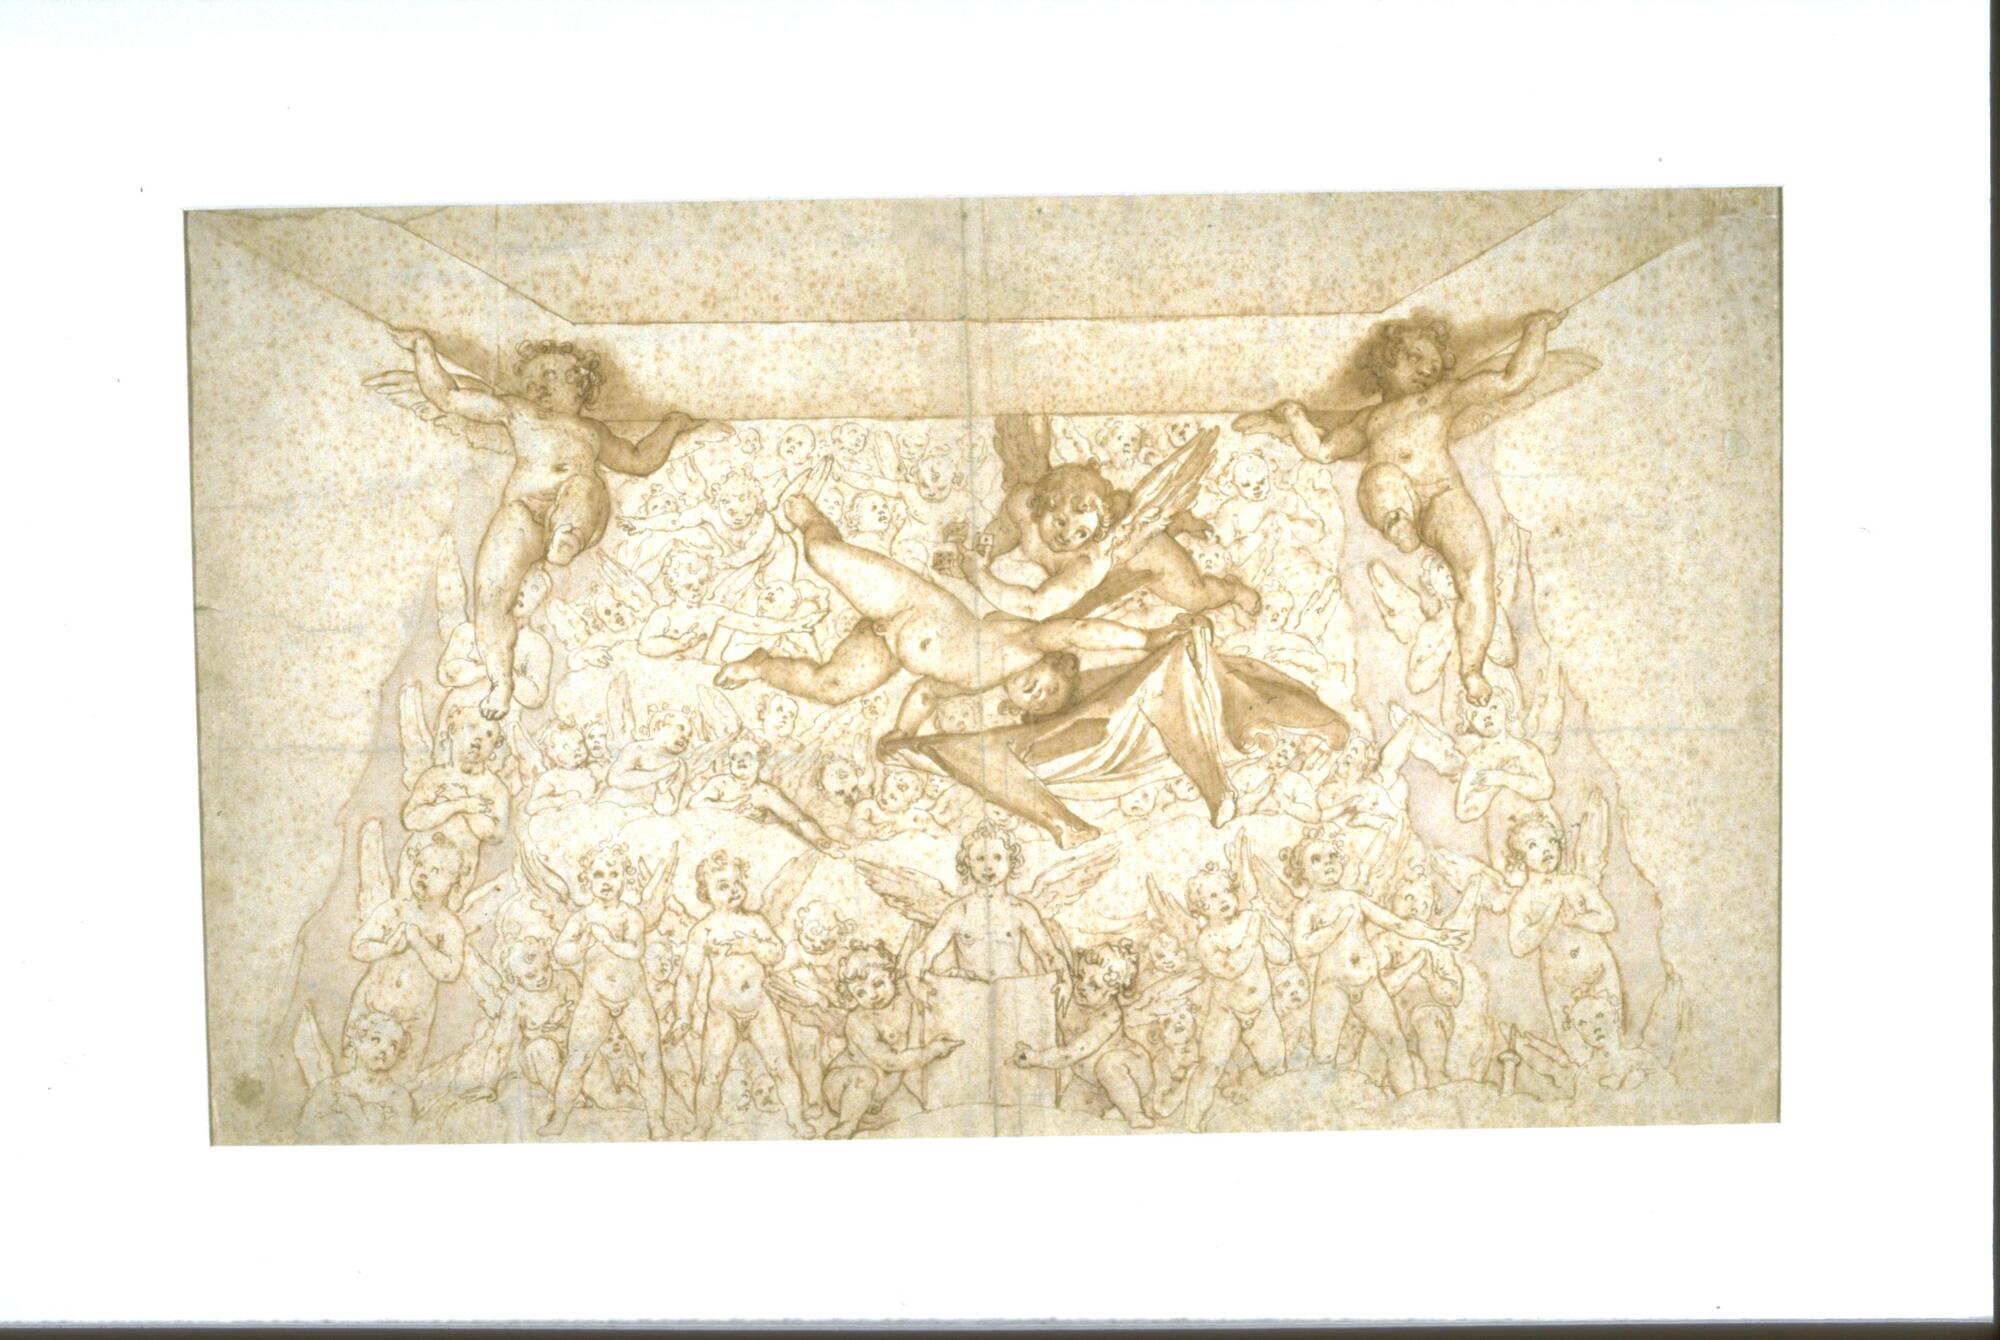 This is a preparatory drawing of a group of putti that form part of the painted decoration of the dome of Florence cathedral. The most striking figures are the putti in the upper corners of the drawing who support an architectural cornice and a pair of putto that appear between them. One of these putti holds a shirt and his companion holds three dice. Myriad other putti are rendered more lightly to give the impression that they are positioned in the background.